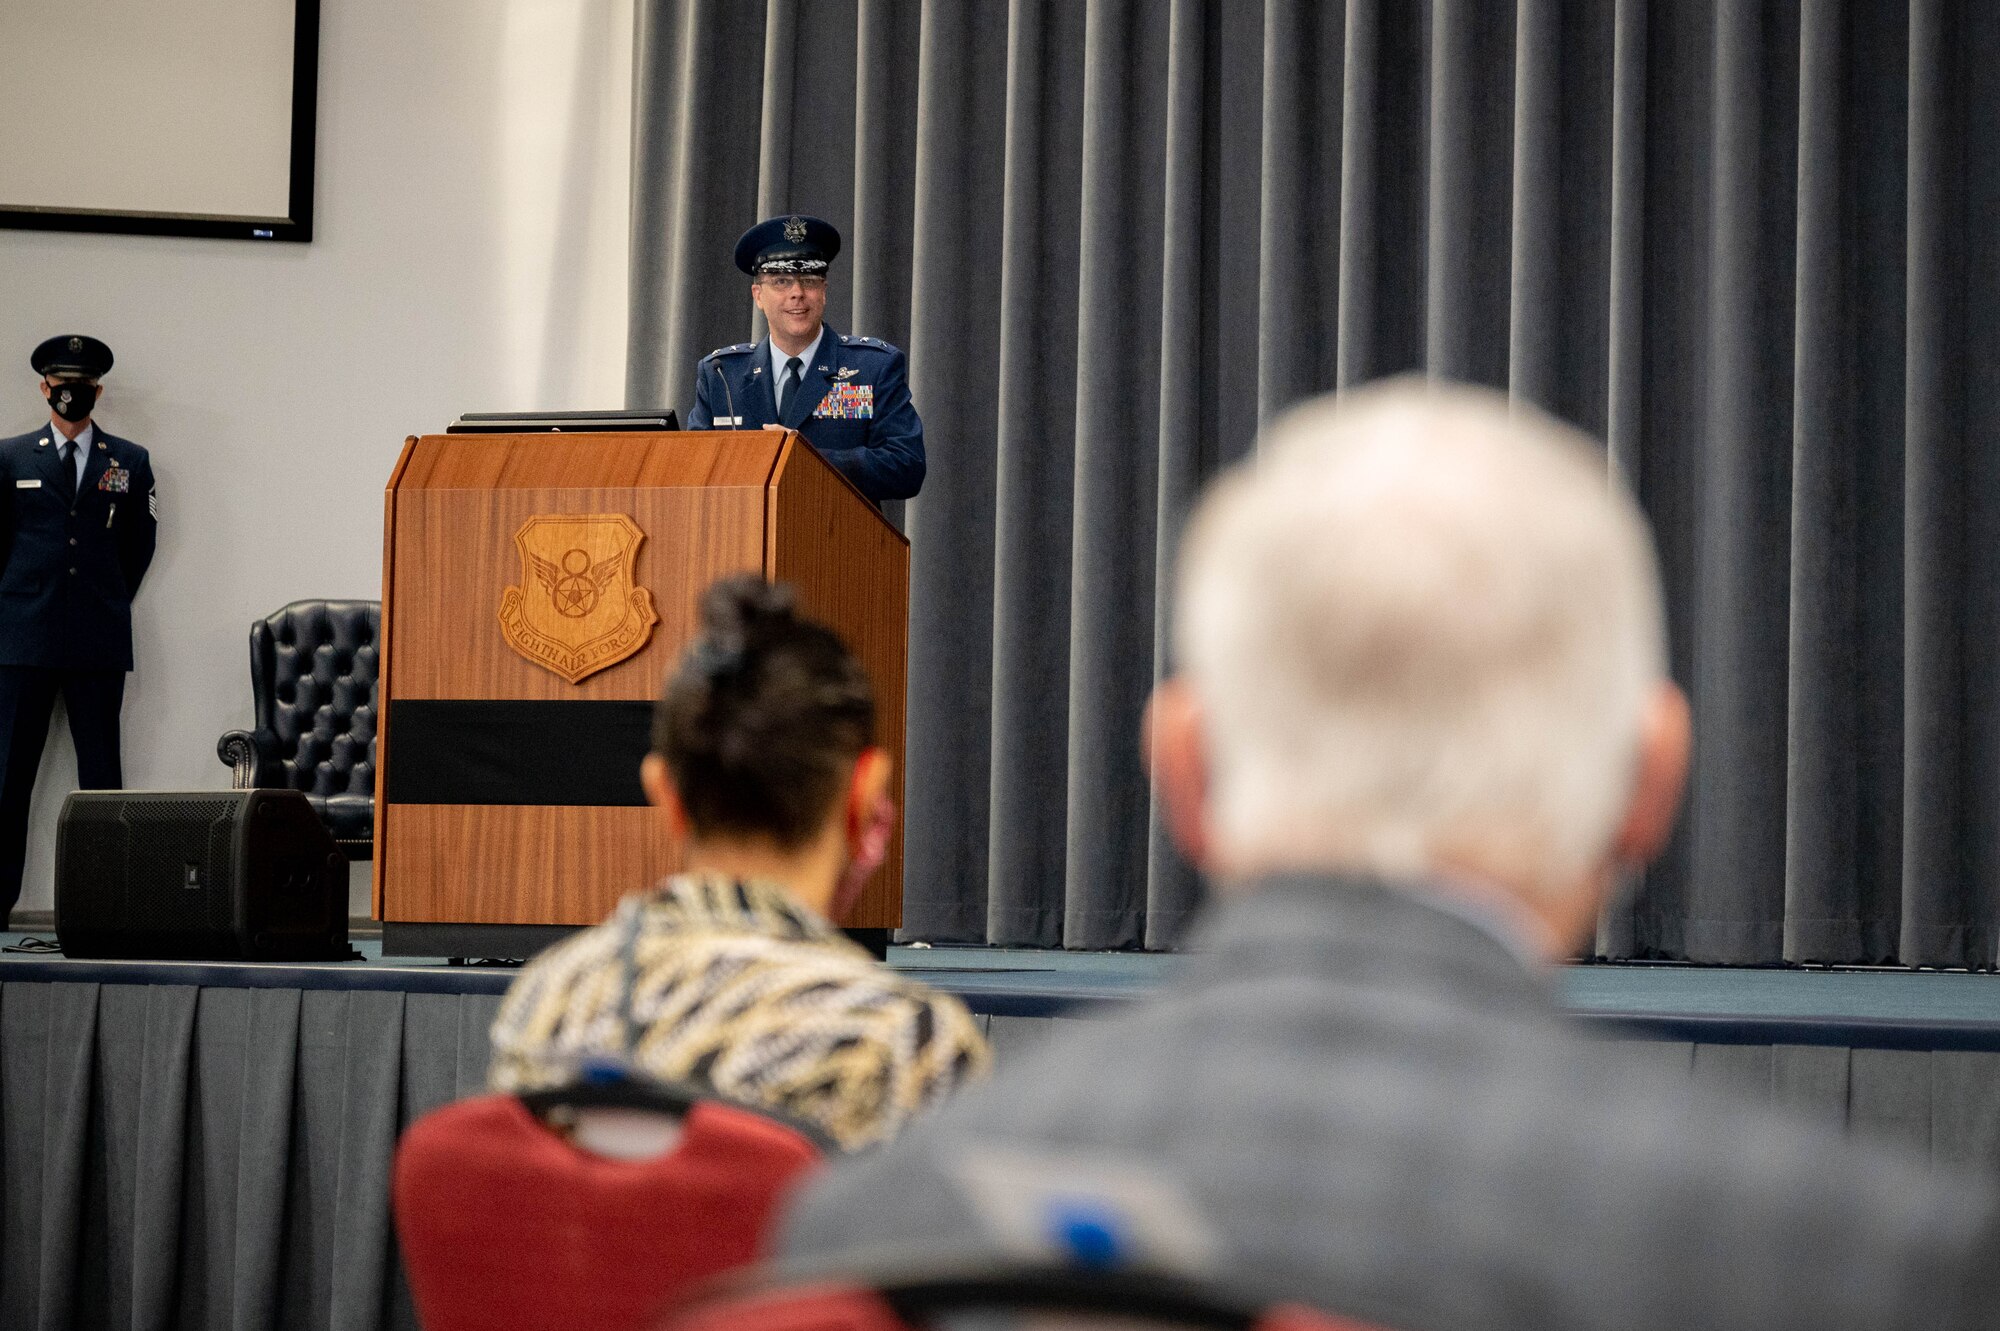 Maj. Gen. Andrew Gebara, incoming 8th Air Force and Joint-Global Strike Operations Center commander, addresses the crowd during a change of command ceremony at Barksdale Air Force Base, La., August 16, 2021. A change of command is a military tradition that represents a formal transfer of authority and responsibility for a unit from one commanding or flag officer to another. (U.S. Air Force photo by Senior Airman Jovante Johnson)